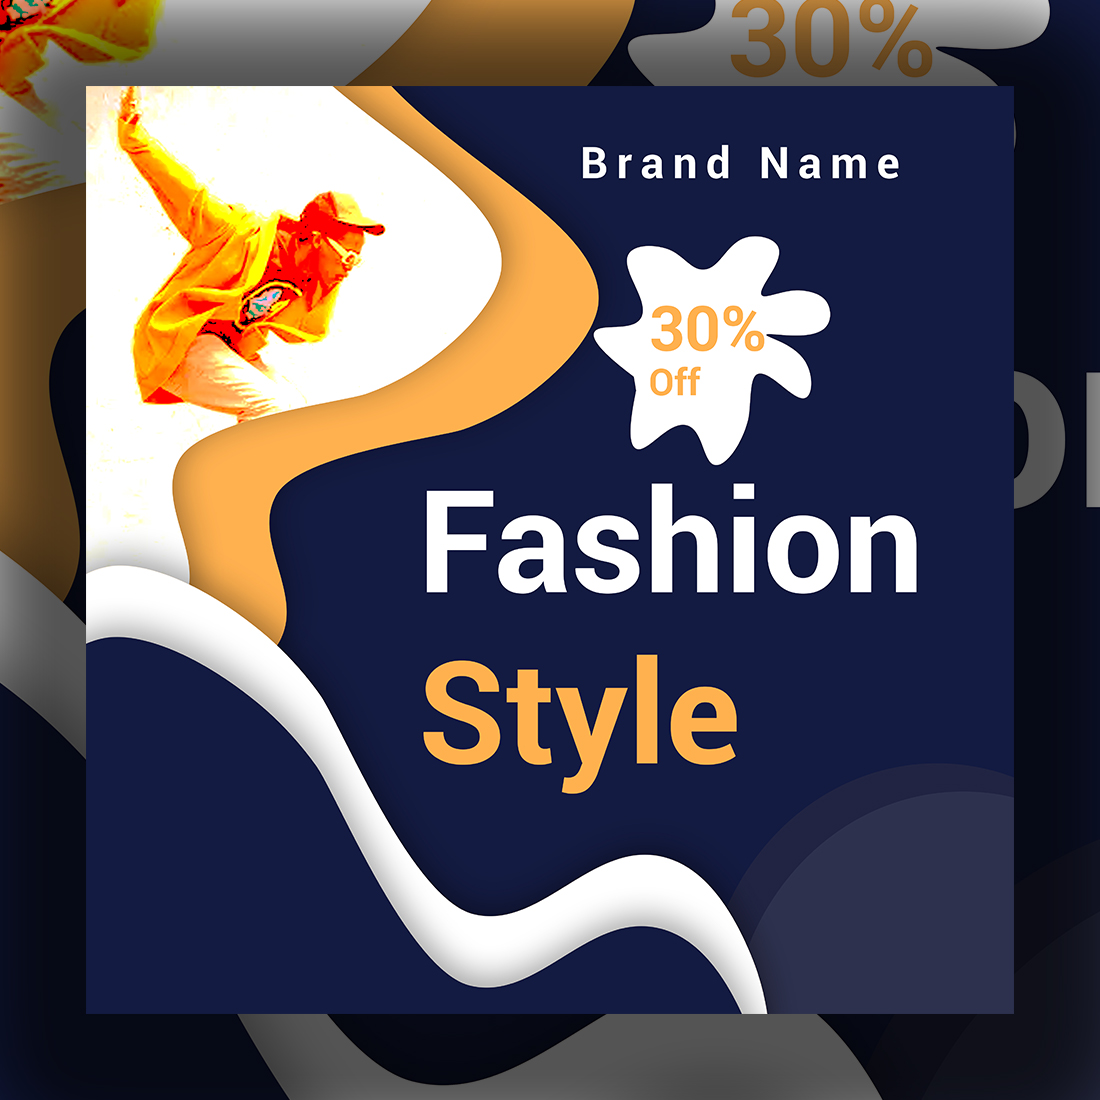 Fashio style poster design ( Best for fashion promotion ) cover image.